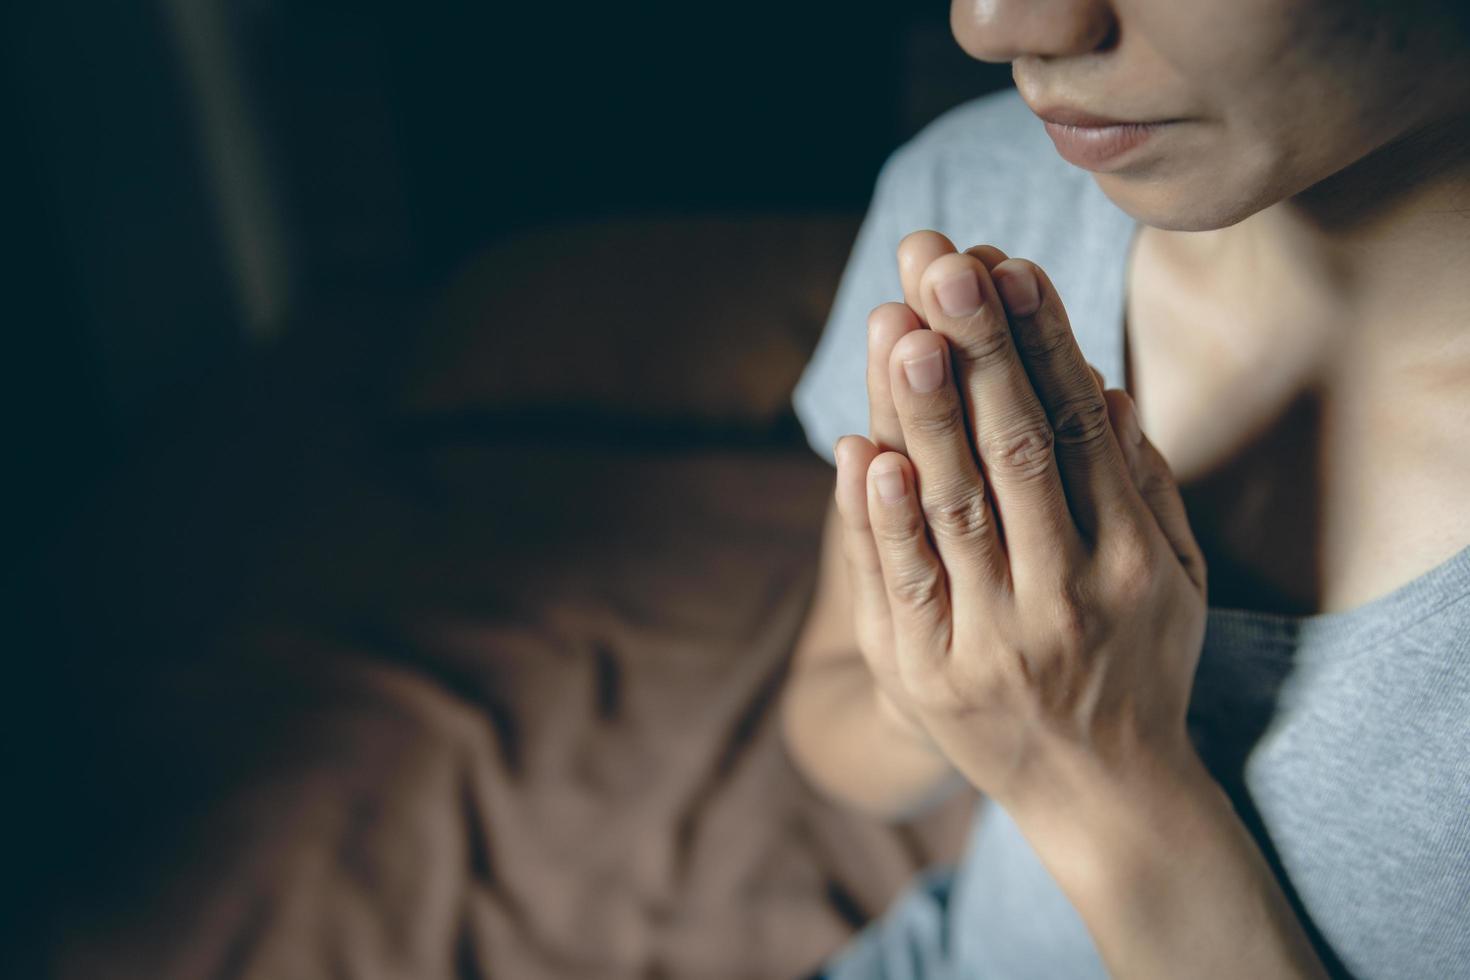 woman Praying hands with faith in religion and belief in God On the morning sunrise background. Namaste or Namaskar hands gesture, Pay respect, Prayer position. photo